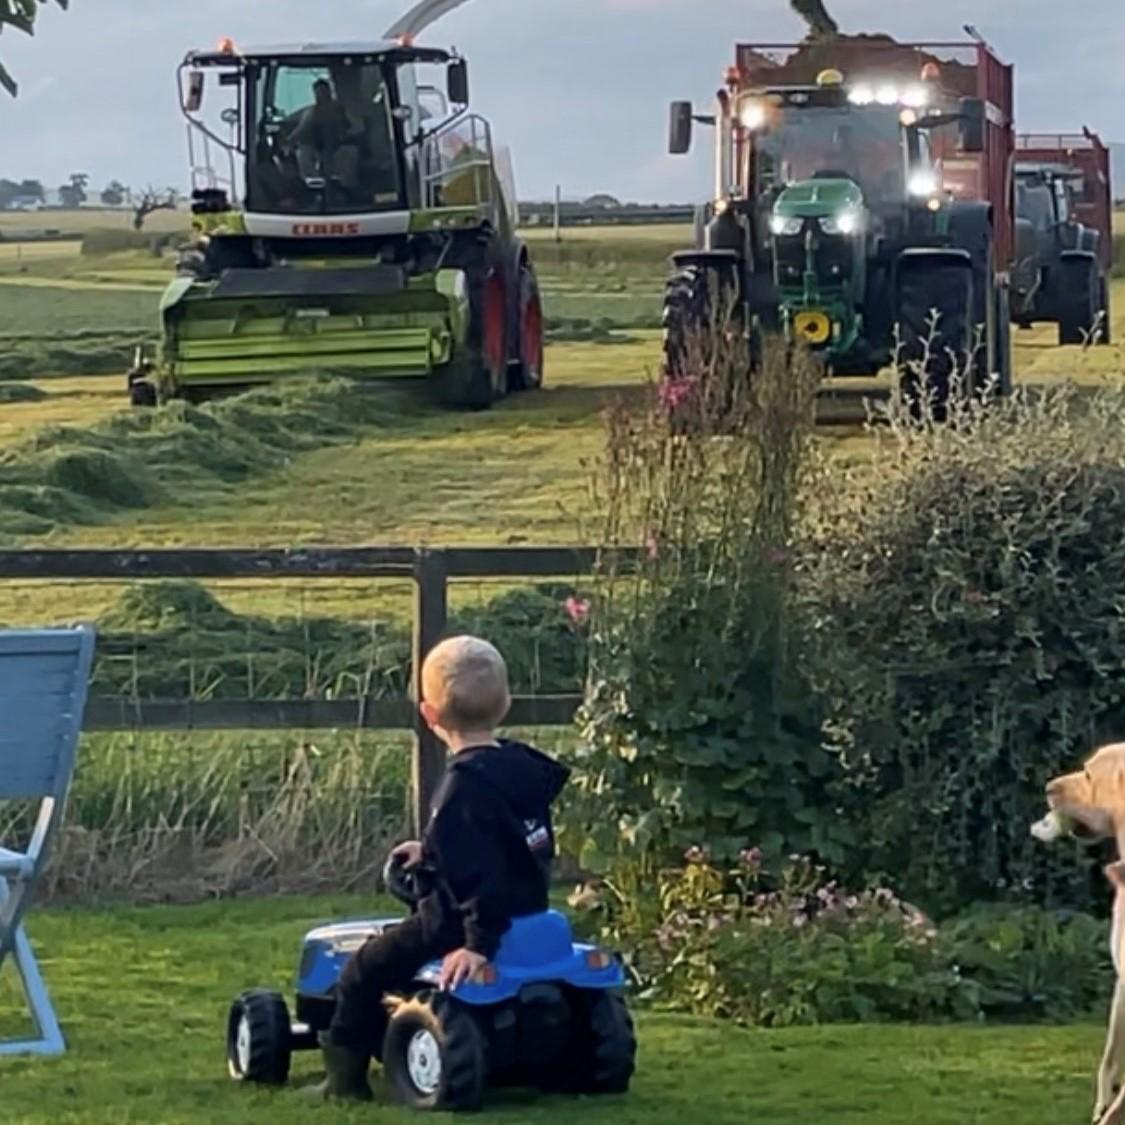 Alexandra Isle - 4 year old Oliver Isle with a front row seat from the garden. Brilliant entertainment for a tractor mad little boy